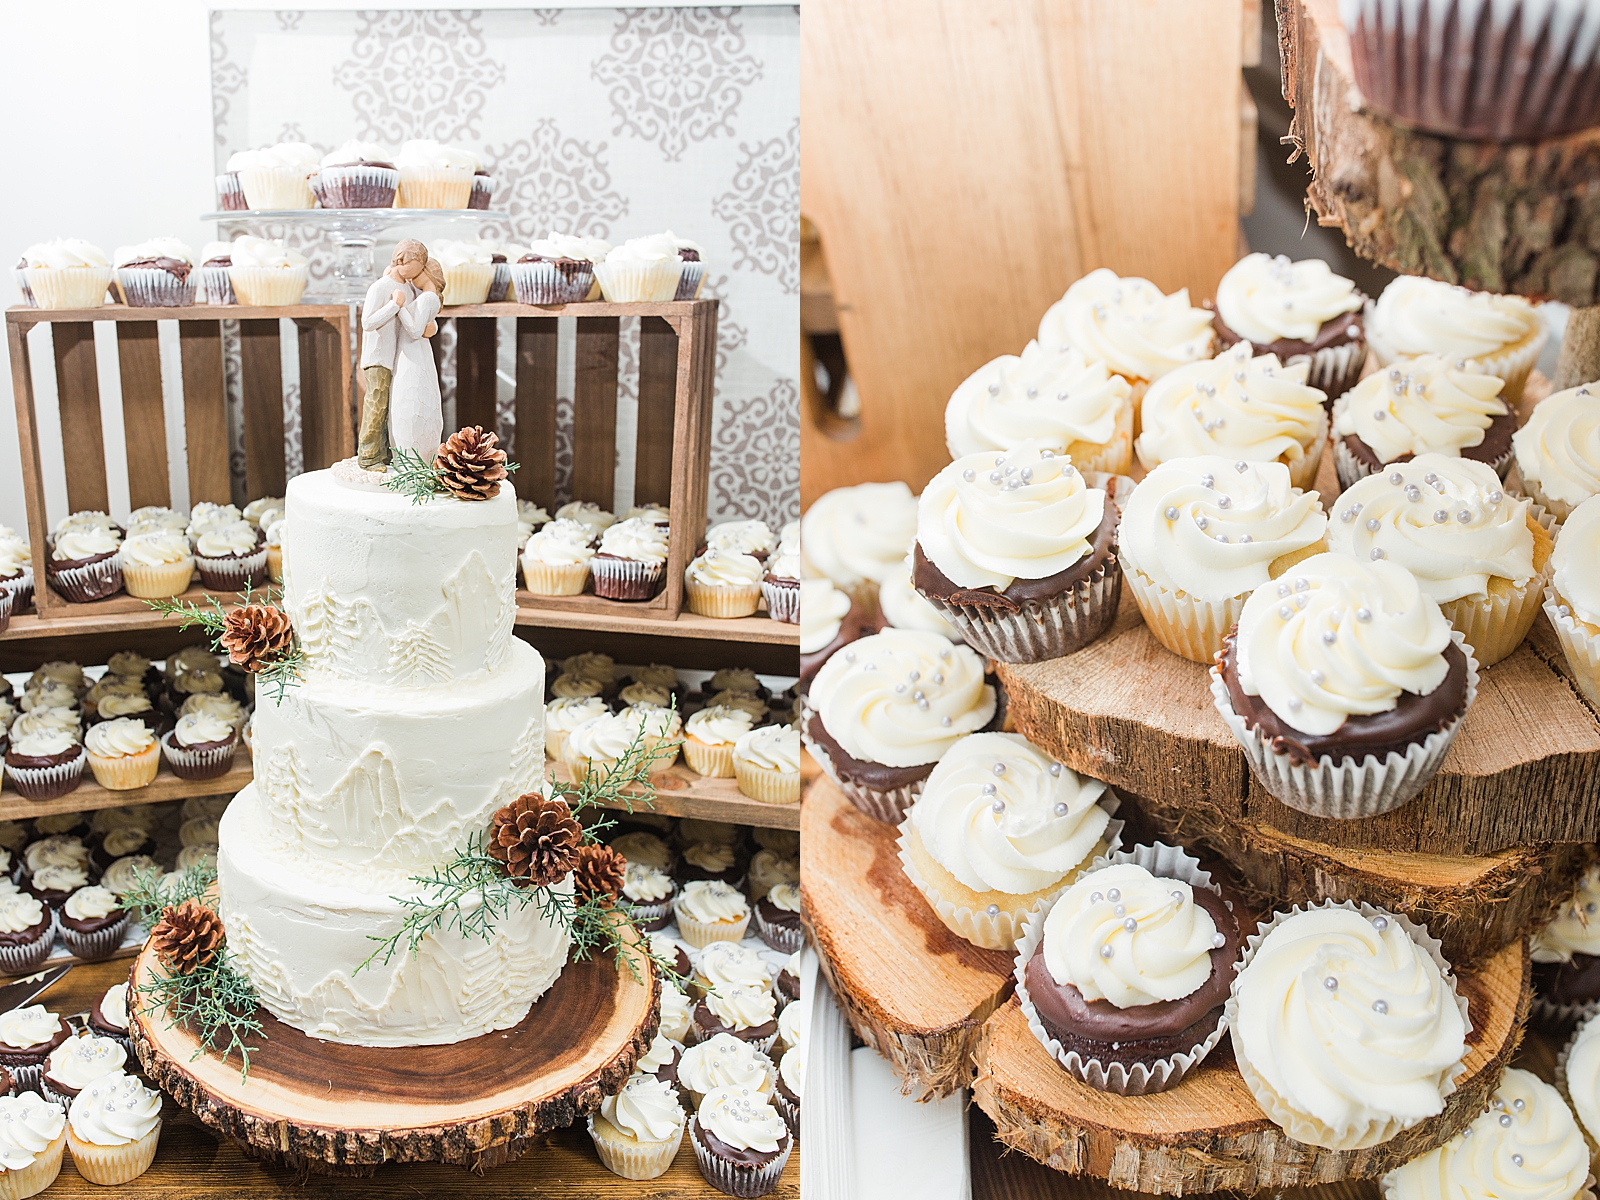 Charlotte Wedding Reception Cake Table with Cake and Cupcakes Photos